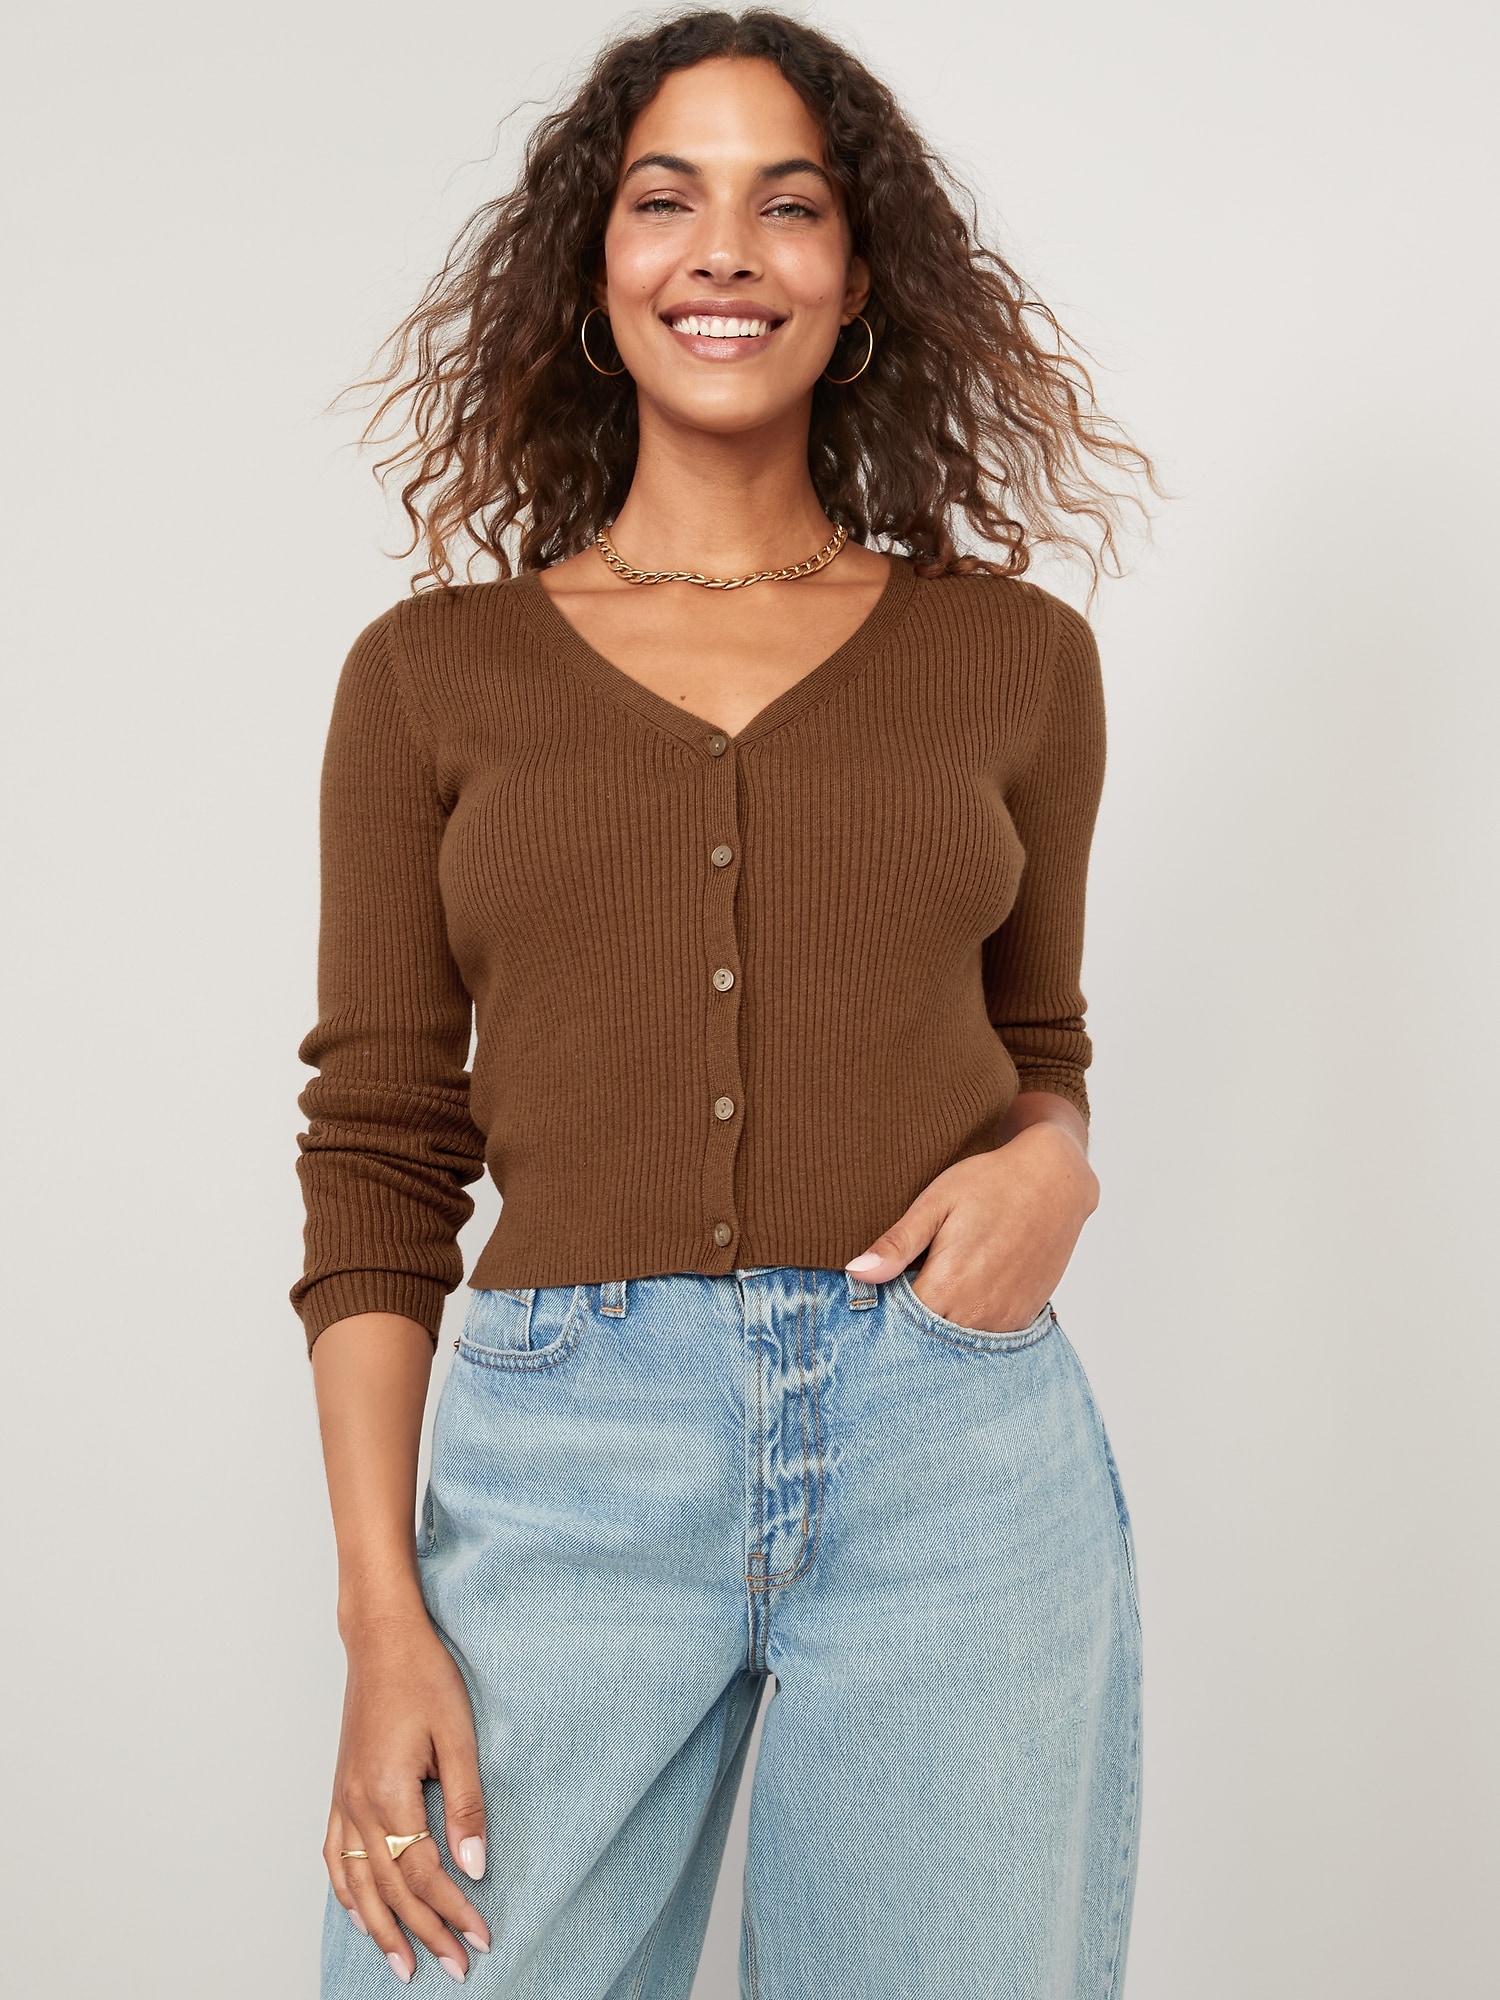 Angreb skuffe klog Long-Sleeve Cropped Rib-Knit Cardigan Sweater for Women | Old Navy